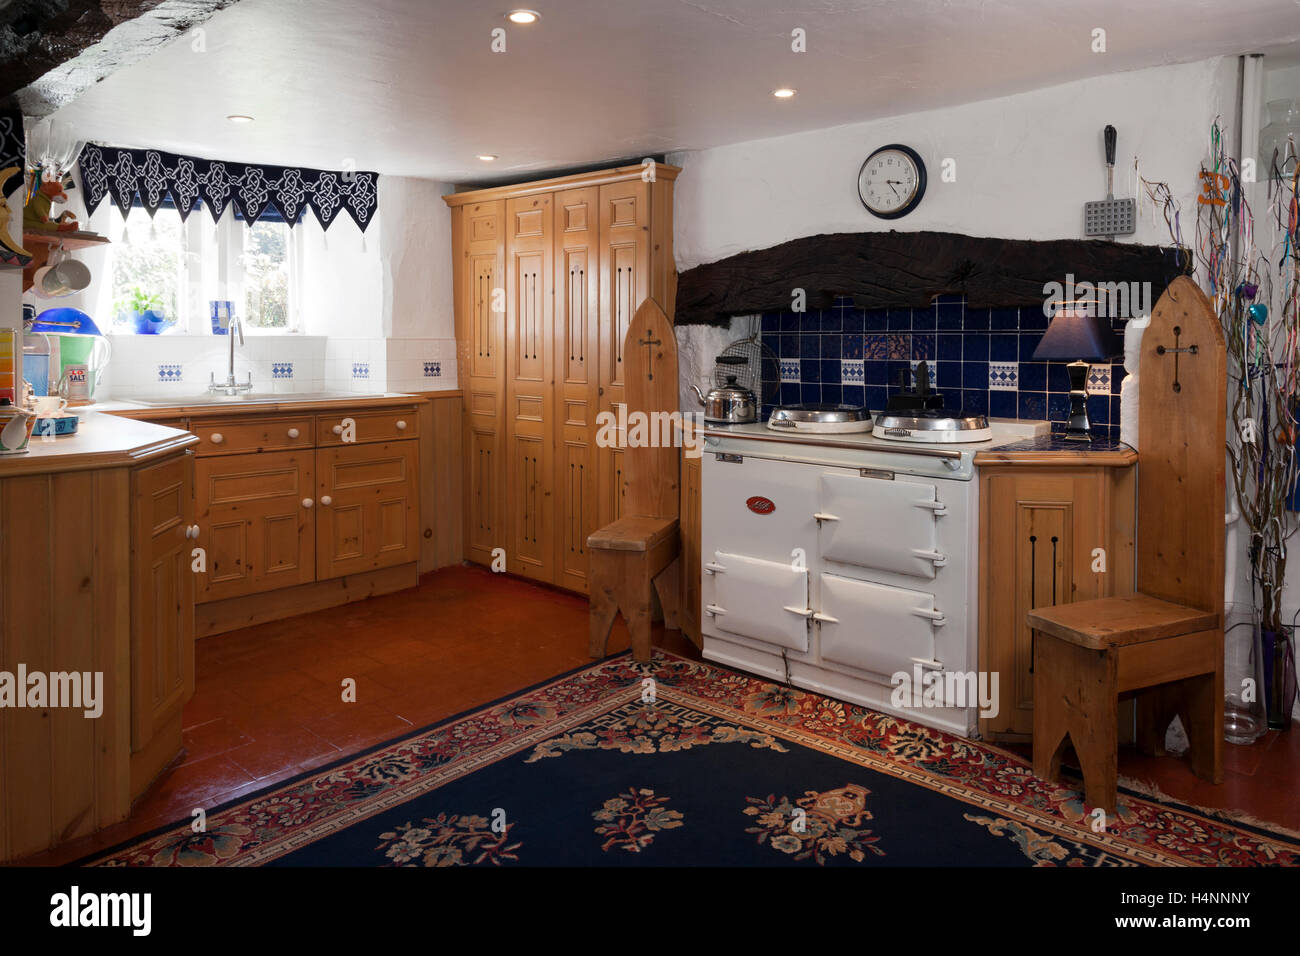 Cottage kitchen with a white Aga cooker Stock Photo